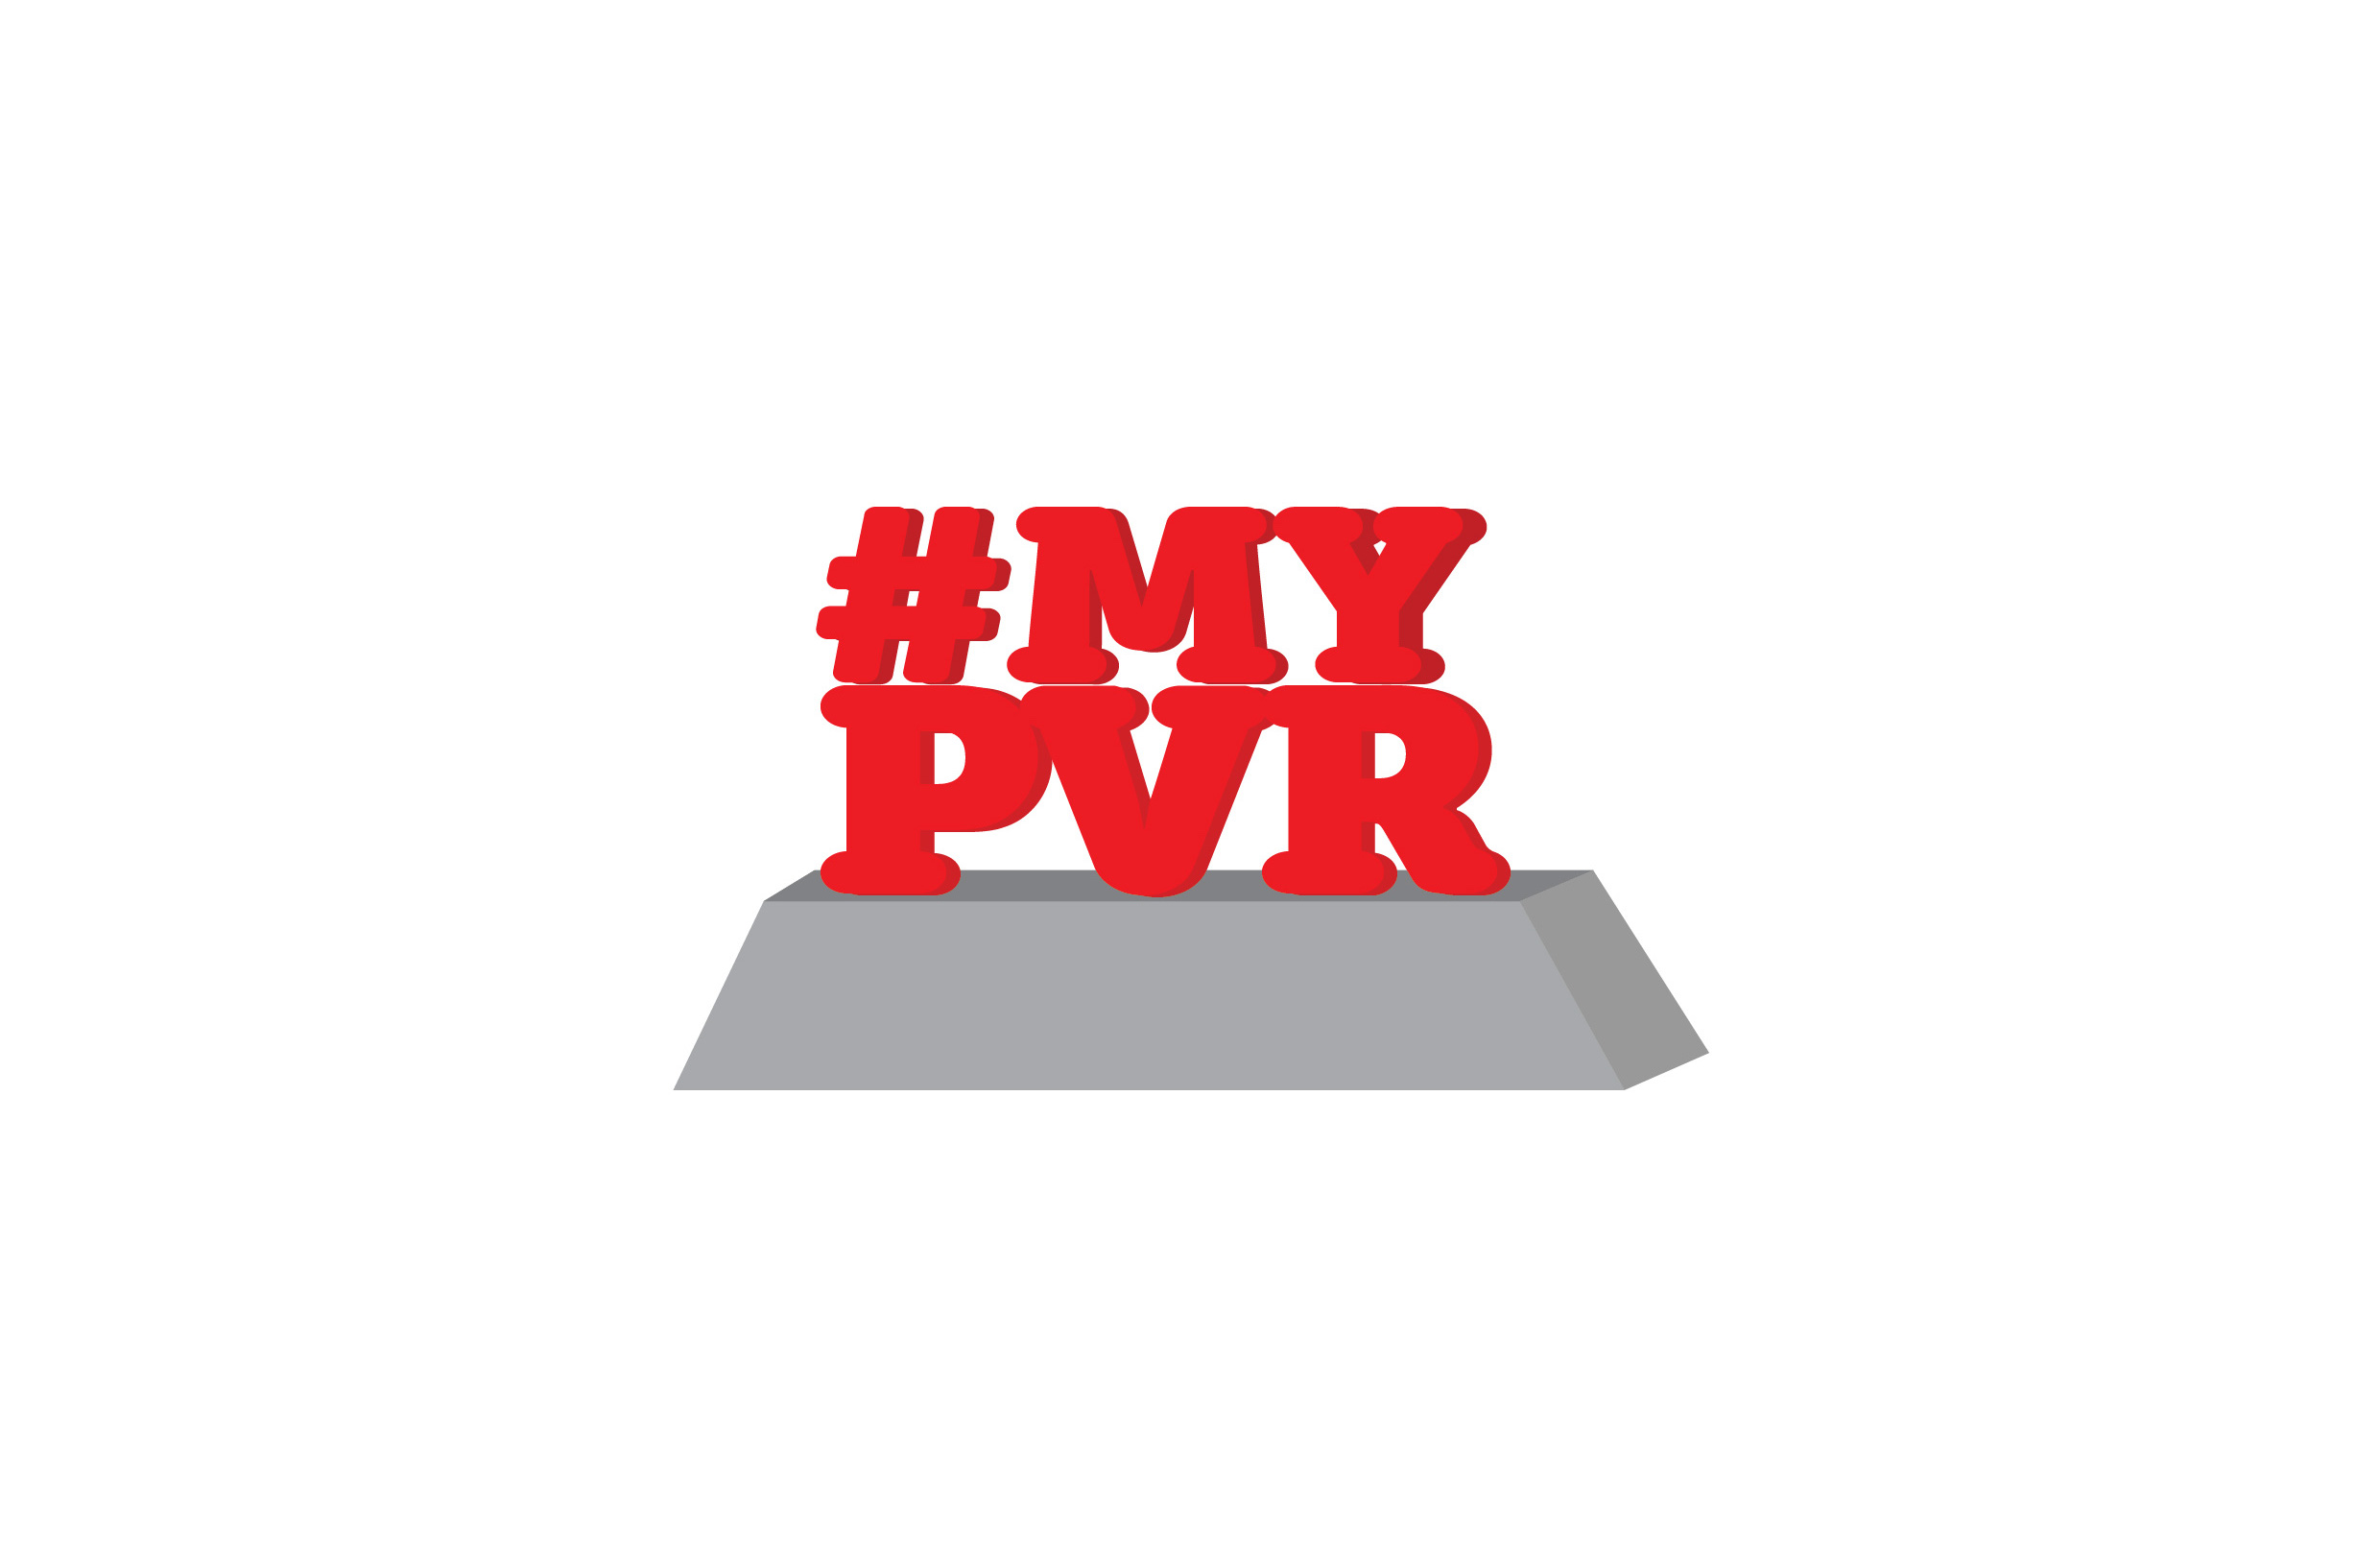 Hotel PVR Logo Design by Brand Care Communications